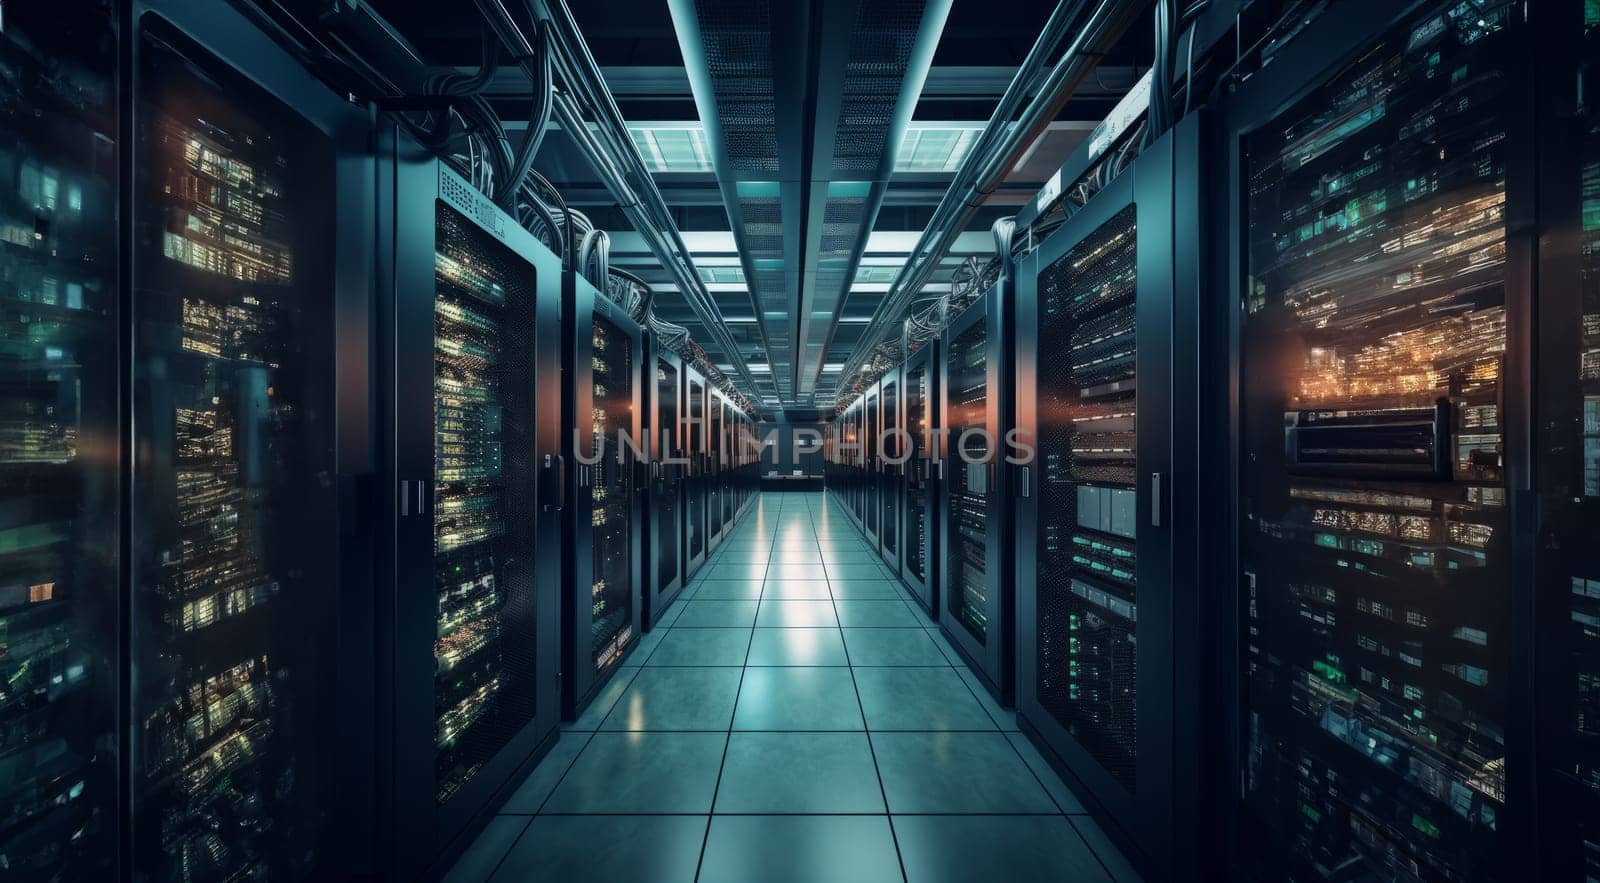 The photograph captures the interior of a modern, spacious server room, showcasing rows of equipment, racks, and cables, illustrating the technological infrastructure and complexity required for data management and network operations.Generated image by dotshock